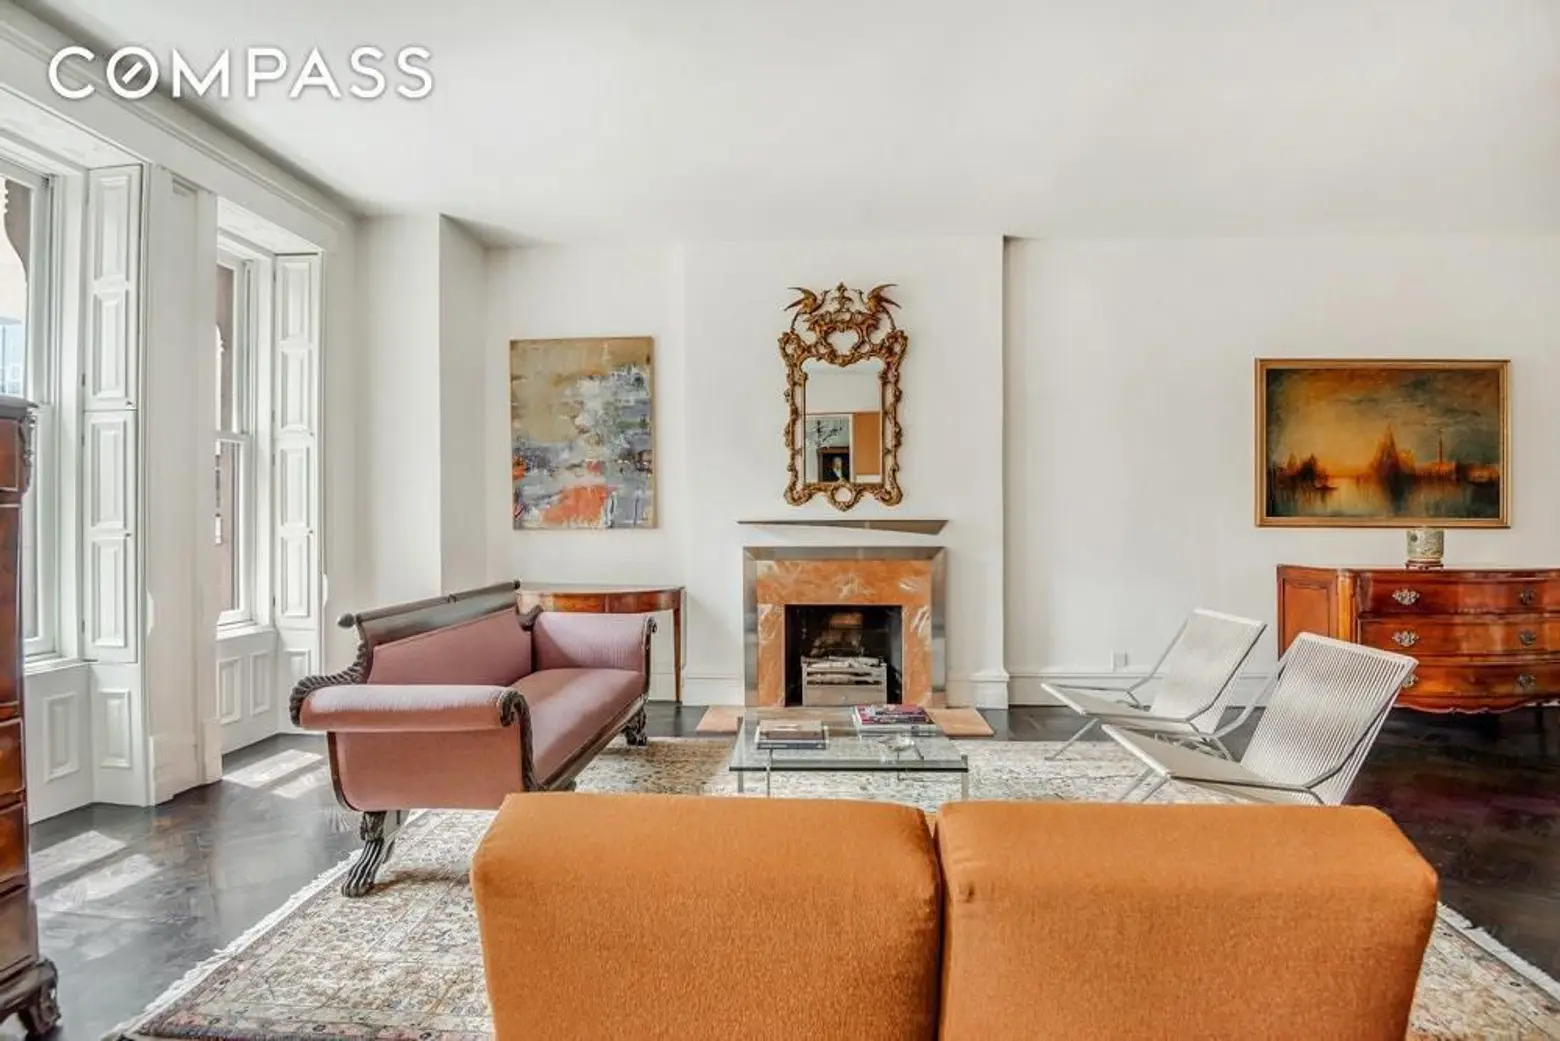 Live in ‘Imperial’ style next door to the Carlyle on the Upper East Side for $1.65M